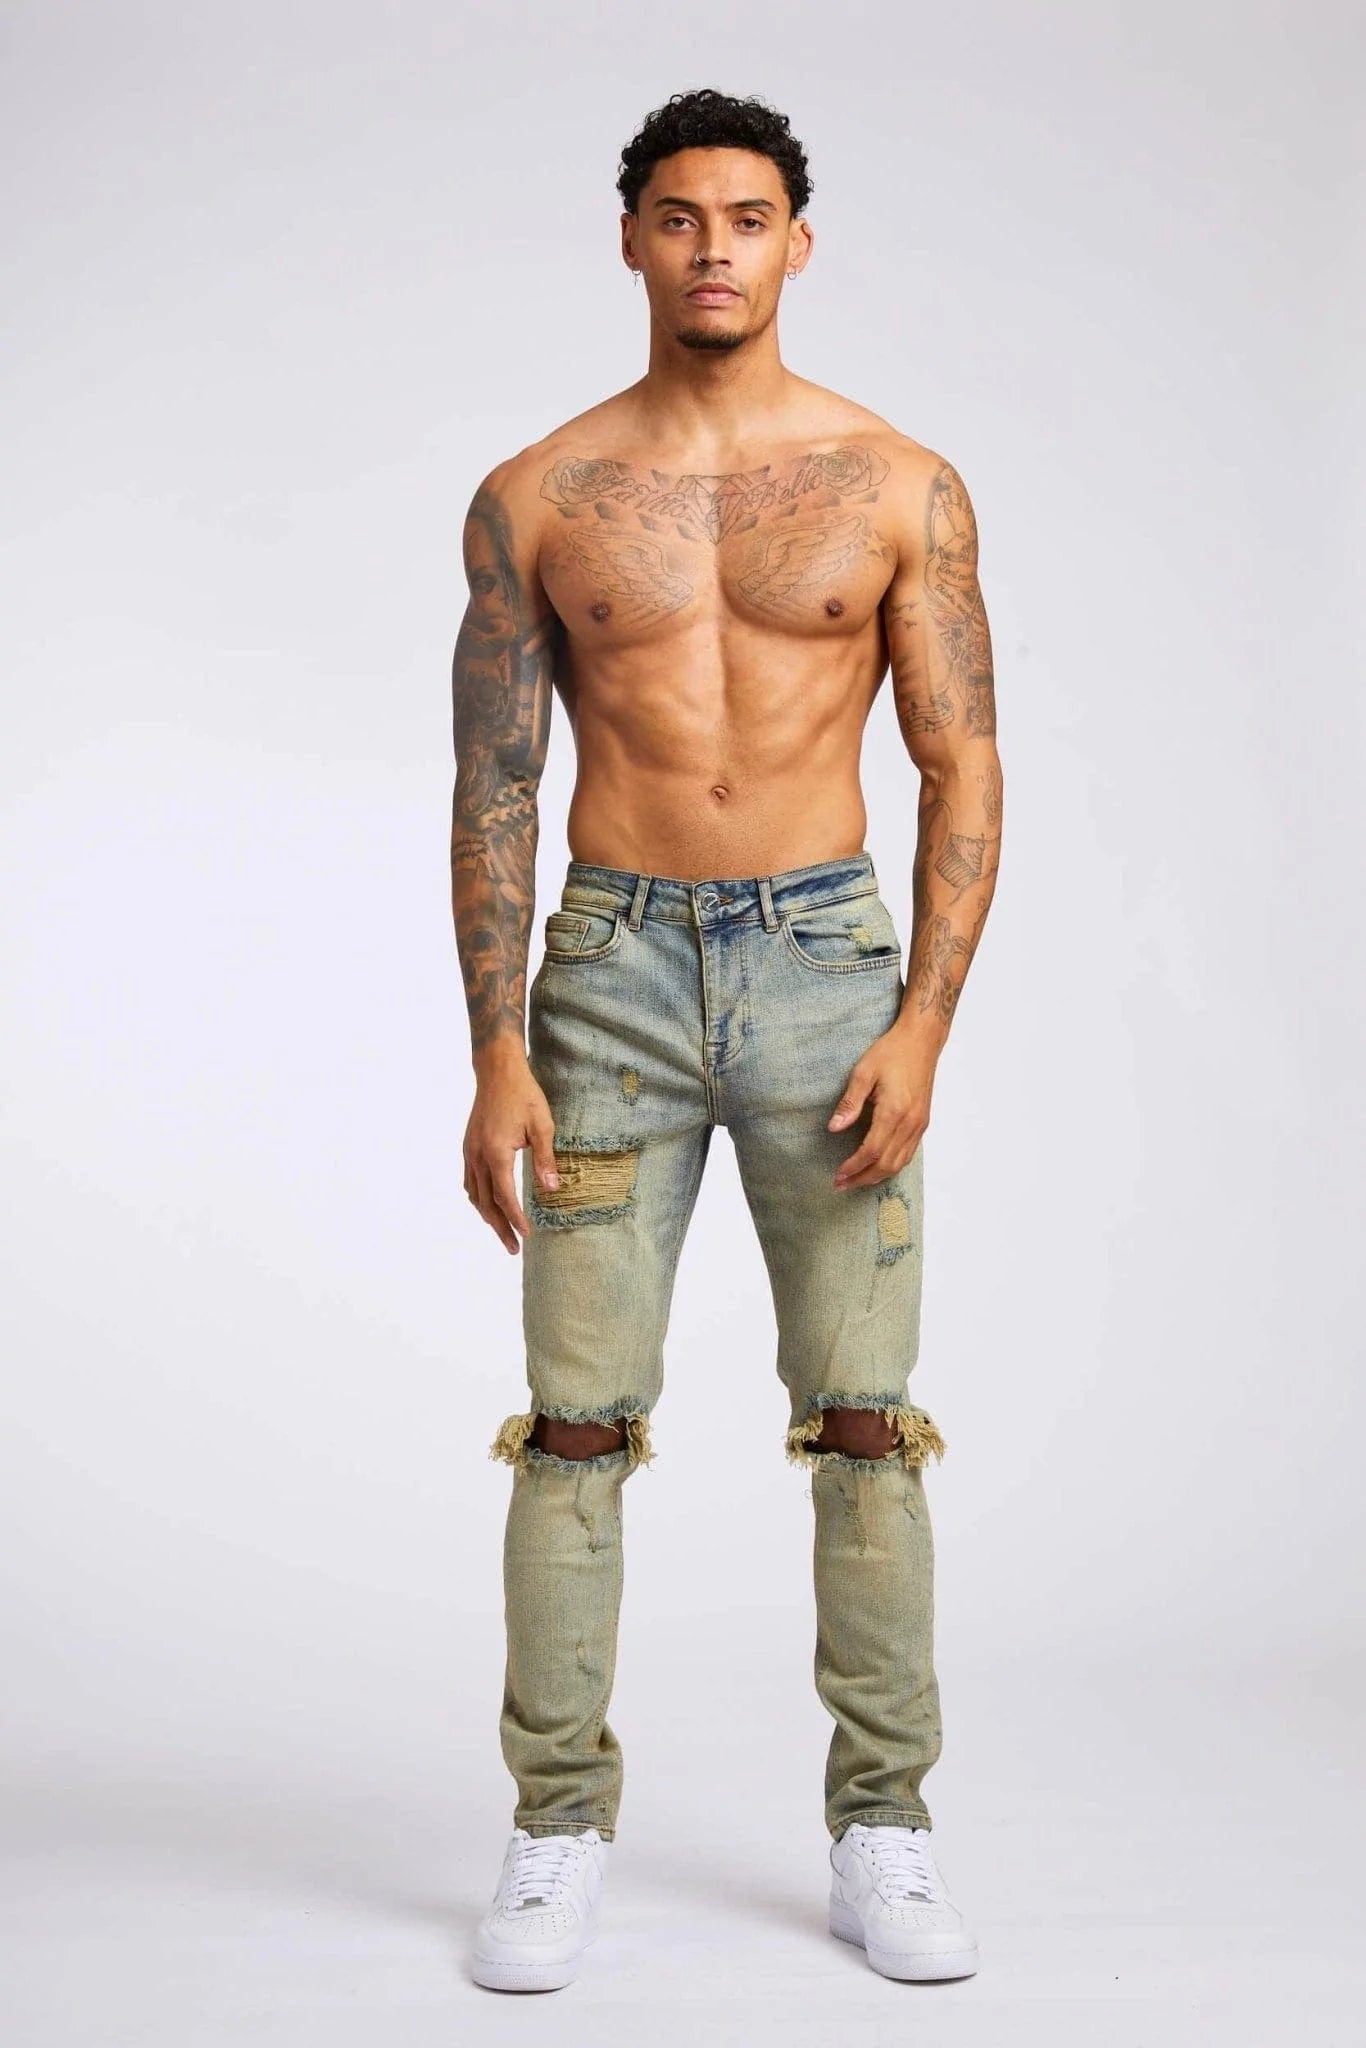 Legend London Jeans SLIM FIT JEANS - VINTAGE STONE WASH RIPPED &amp; REPAIRED